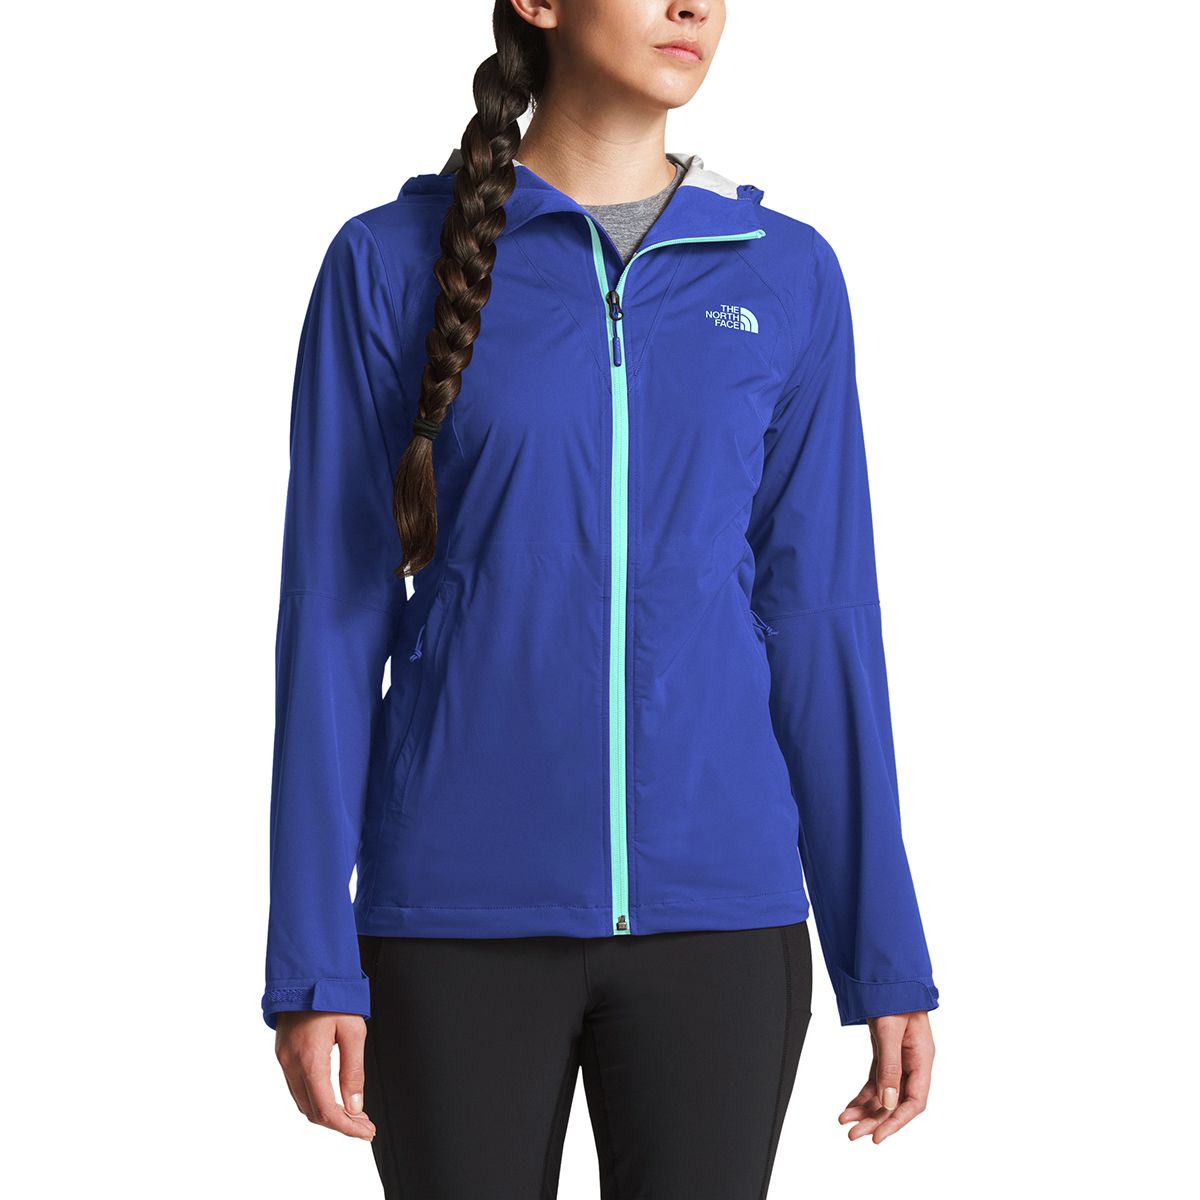 women's allproof stretch jacket north face